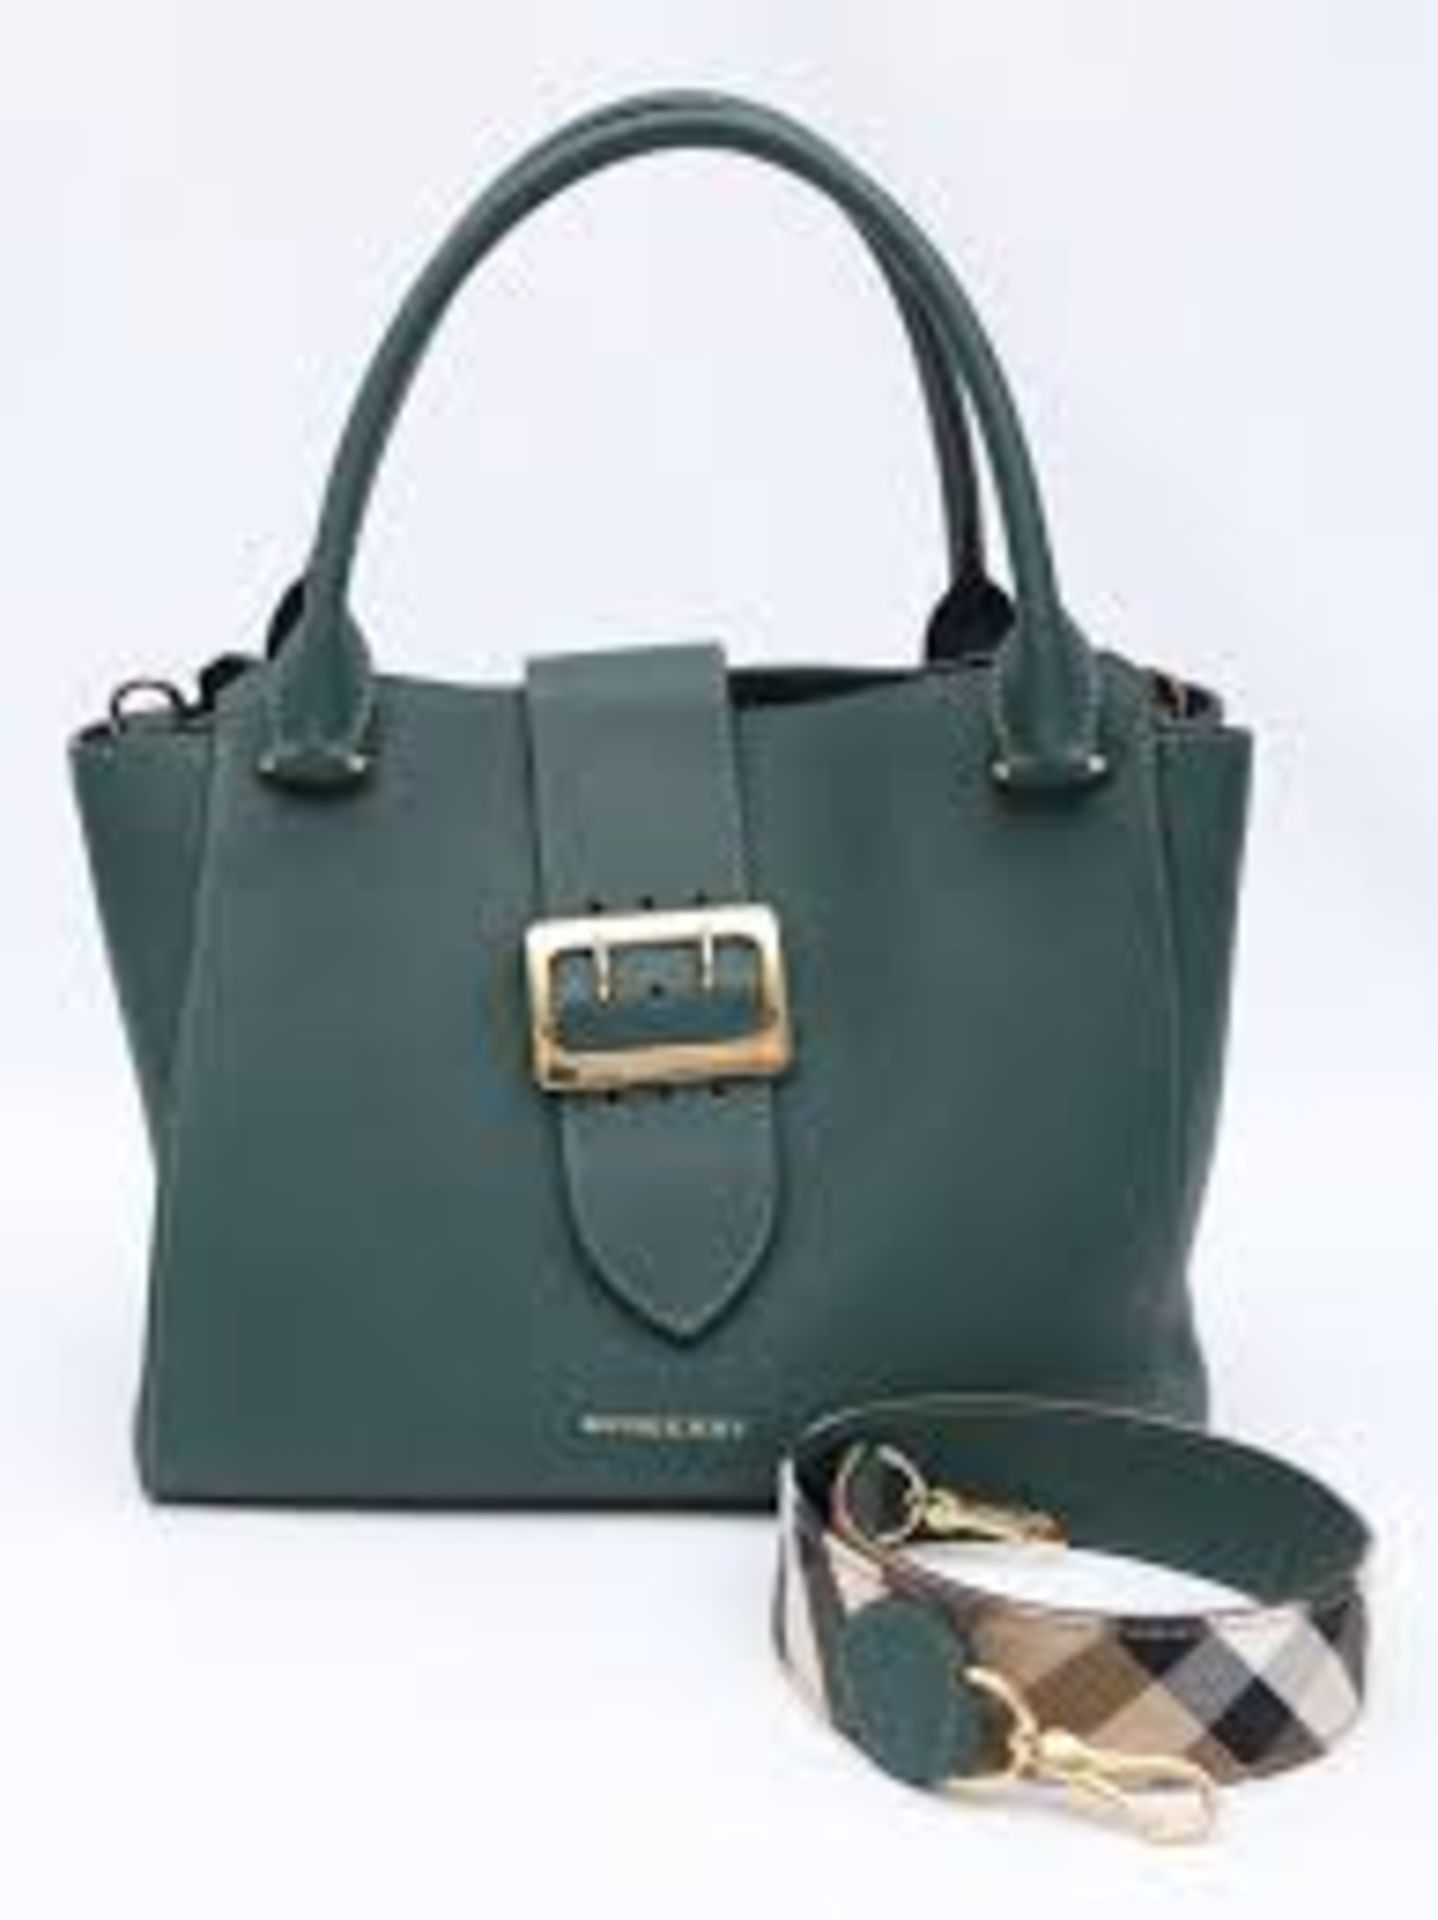 Burberry Green Buckle Tote Leather. 40x25cm. - Image 3 of 11